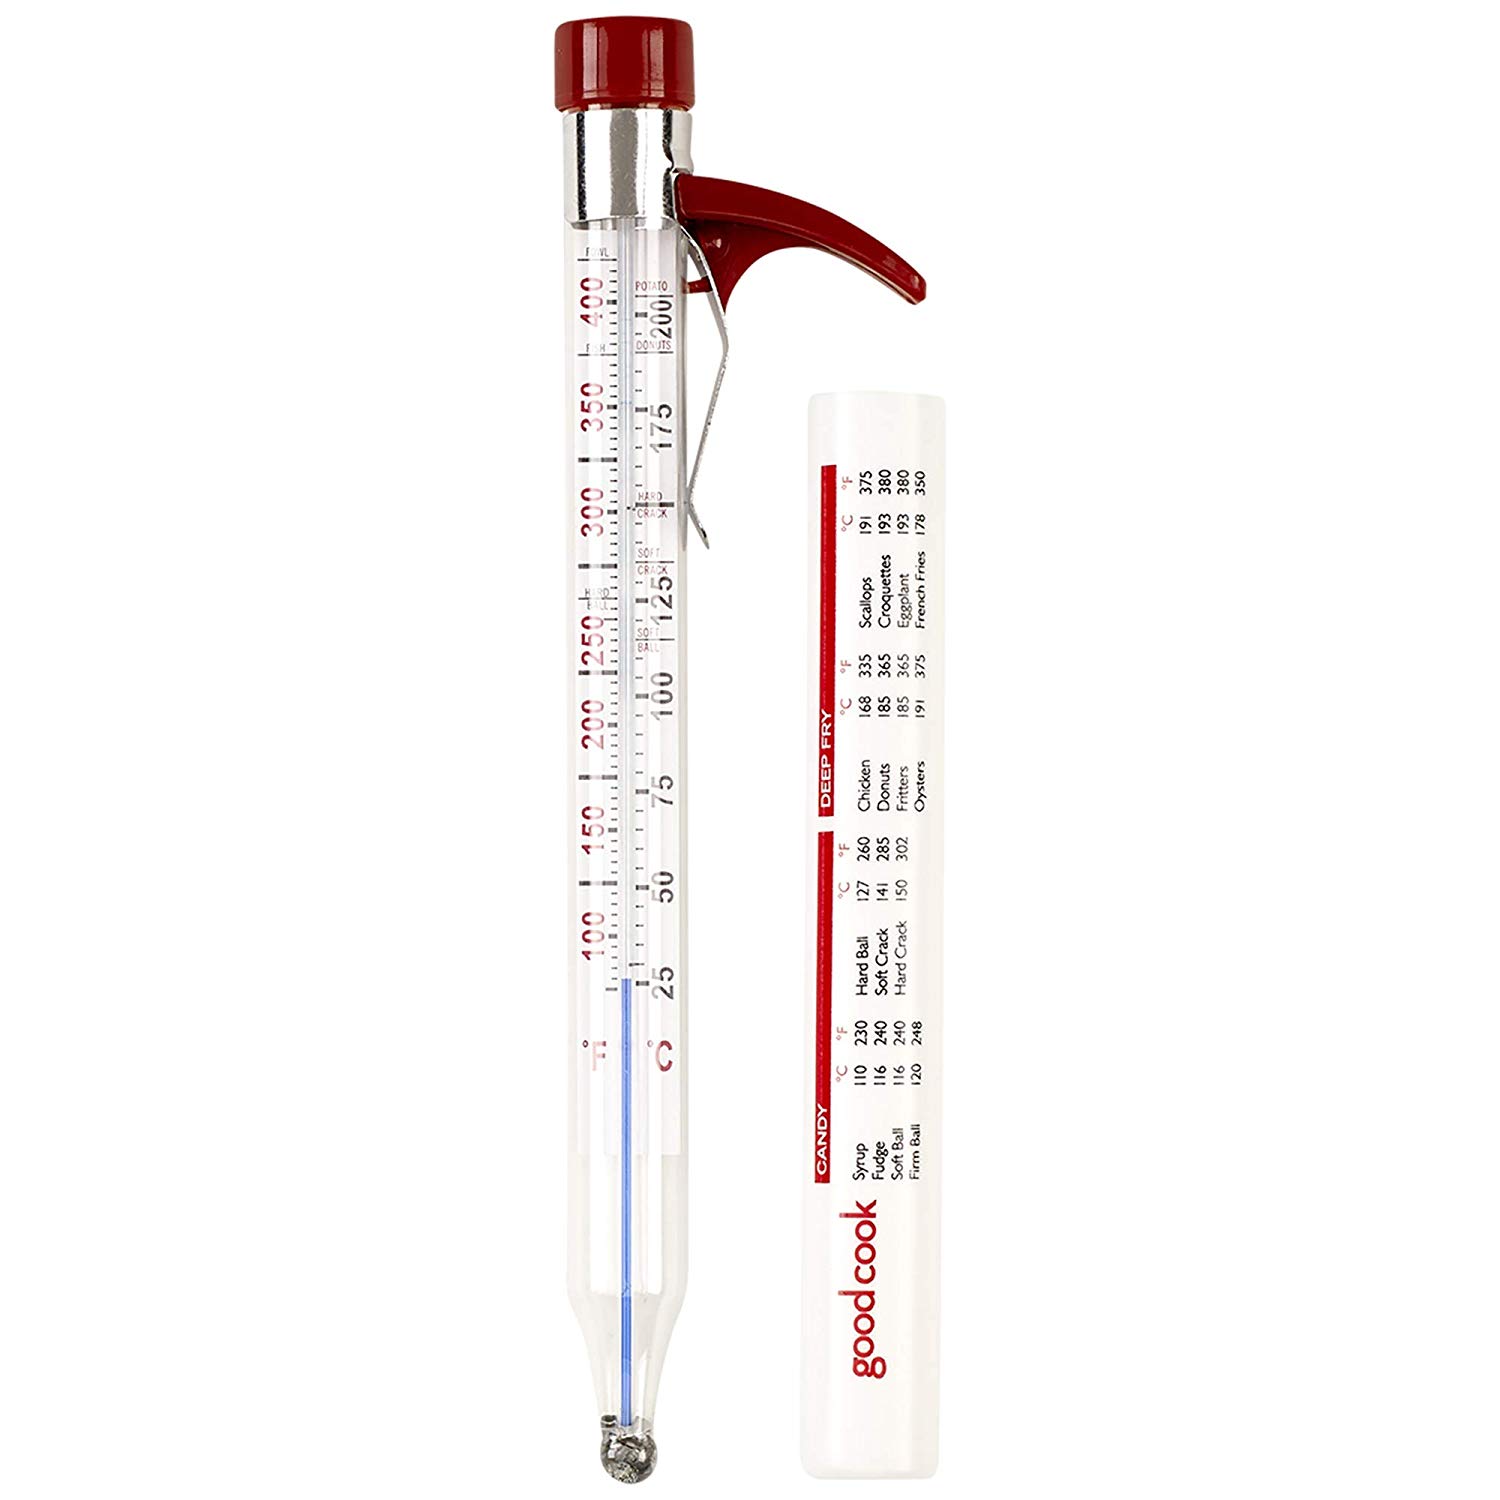 Goodcook Precision Candy/Fry Thermometer, 1 ct - Foods Co.